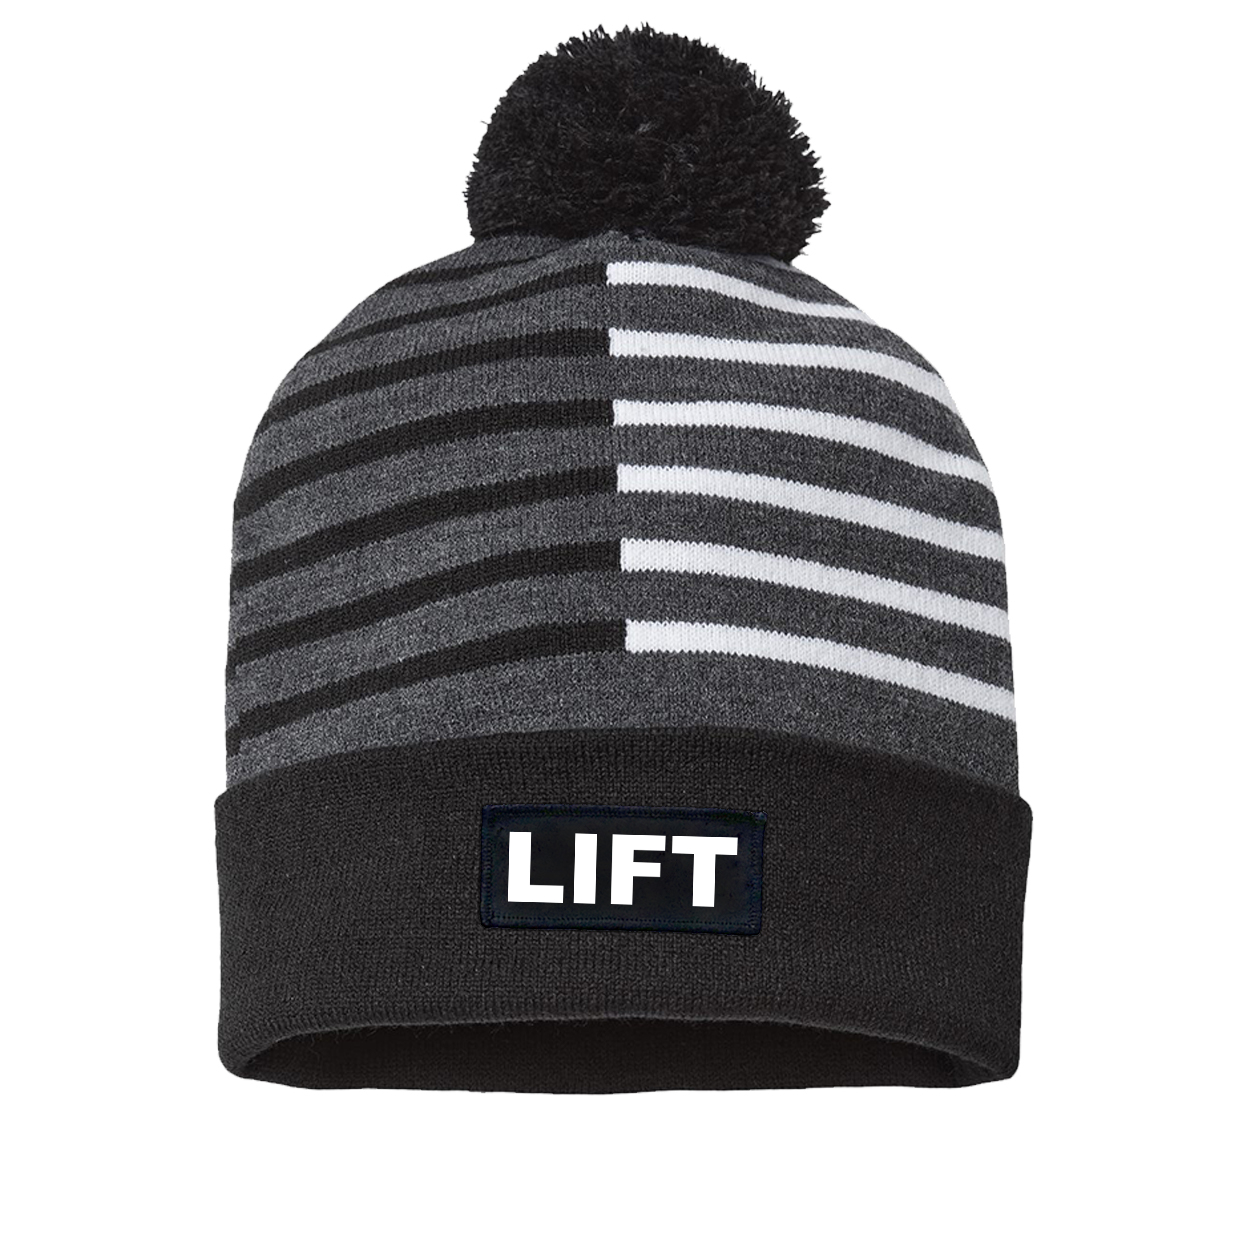 Lift Brand Logo Night Out Woven Patch Roll Up Pom Knit Beanie Half Color Black/White (White Logo)